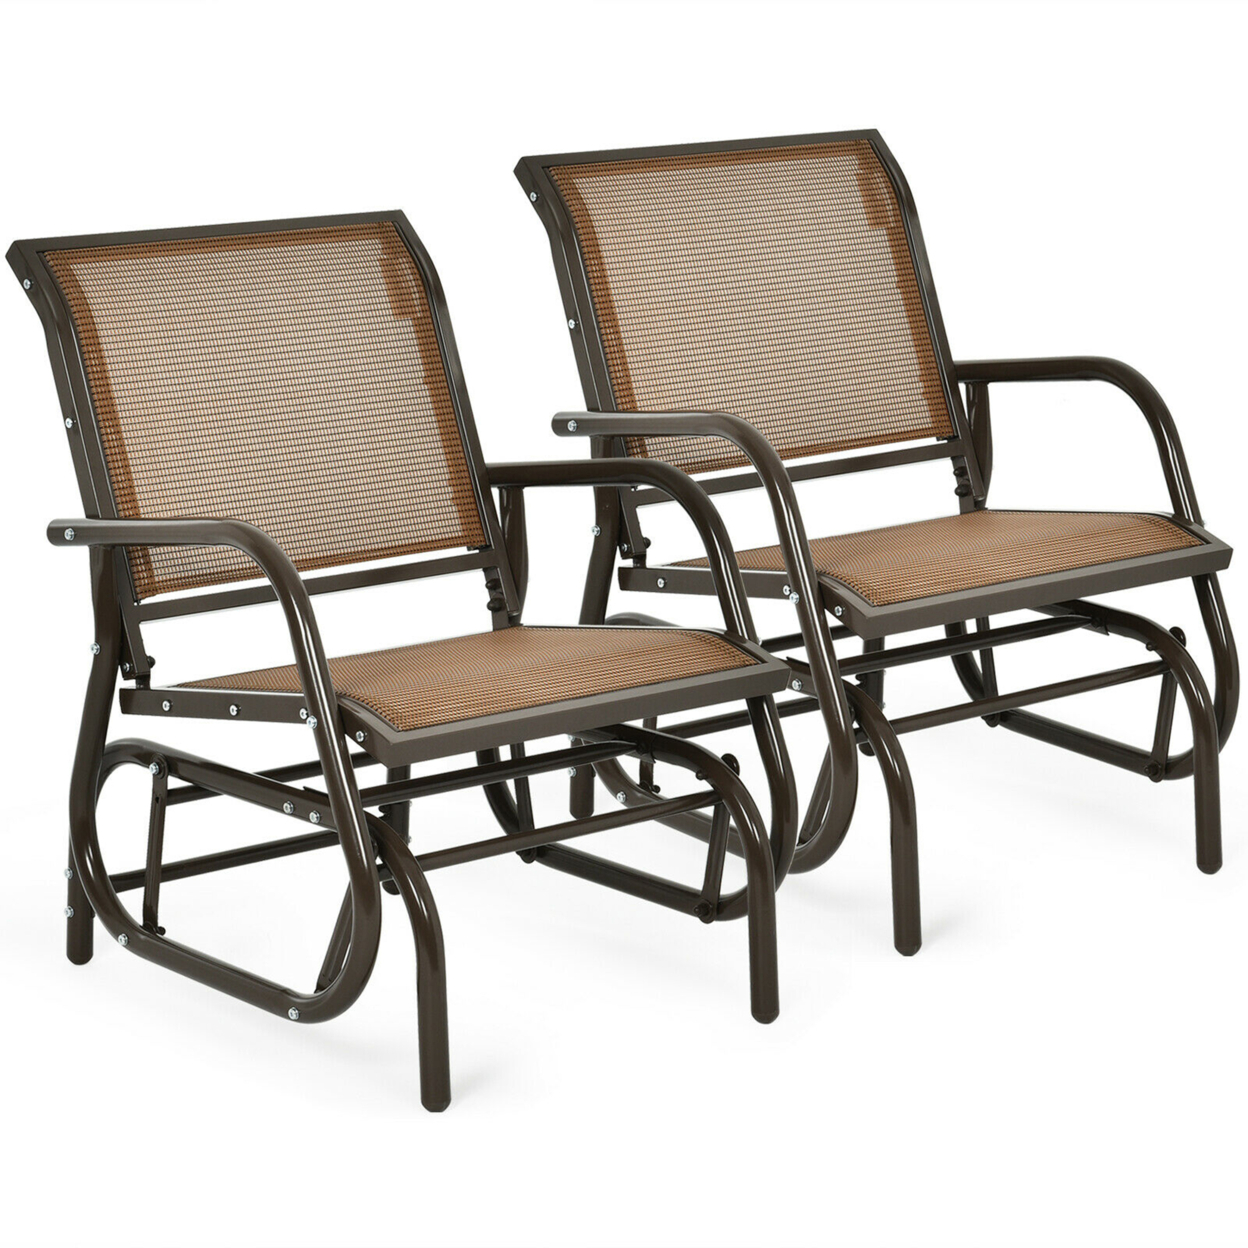 2PCS Patio Swing Glider Chair Single Rocking Chair Yard Outdoor Brown